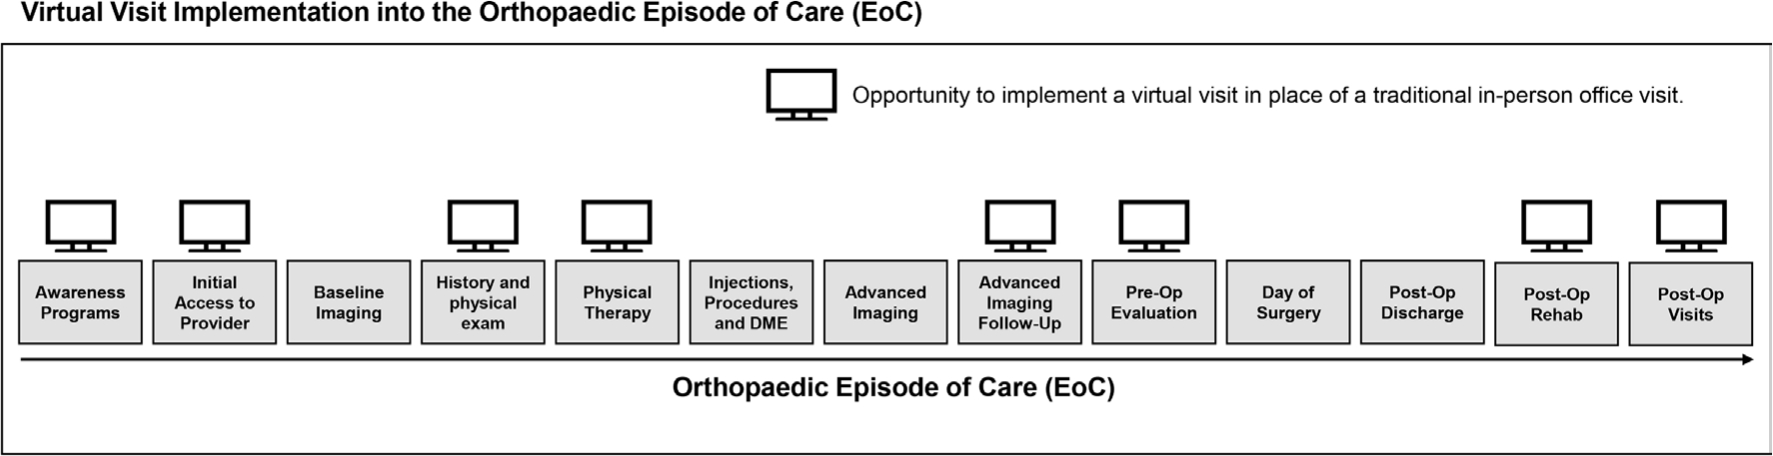 Fig. 3 
            Multiple opportunities to implement a virtual visit in place of a traditional in-person office visit across the orthopaedic episode of care (EoC).
          